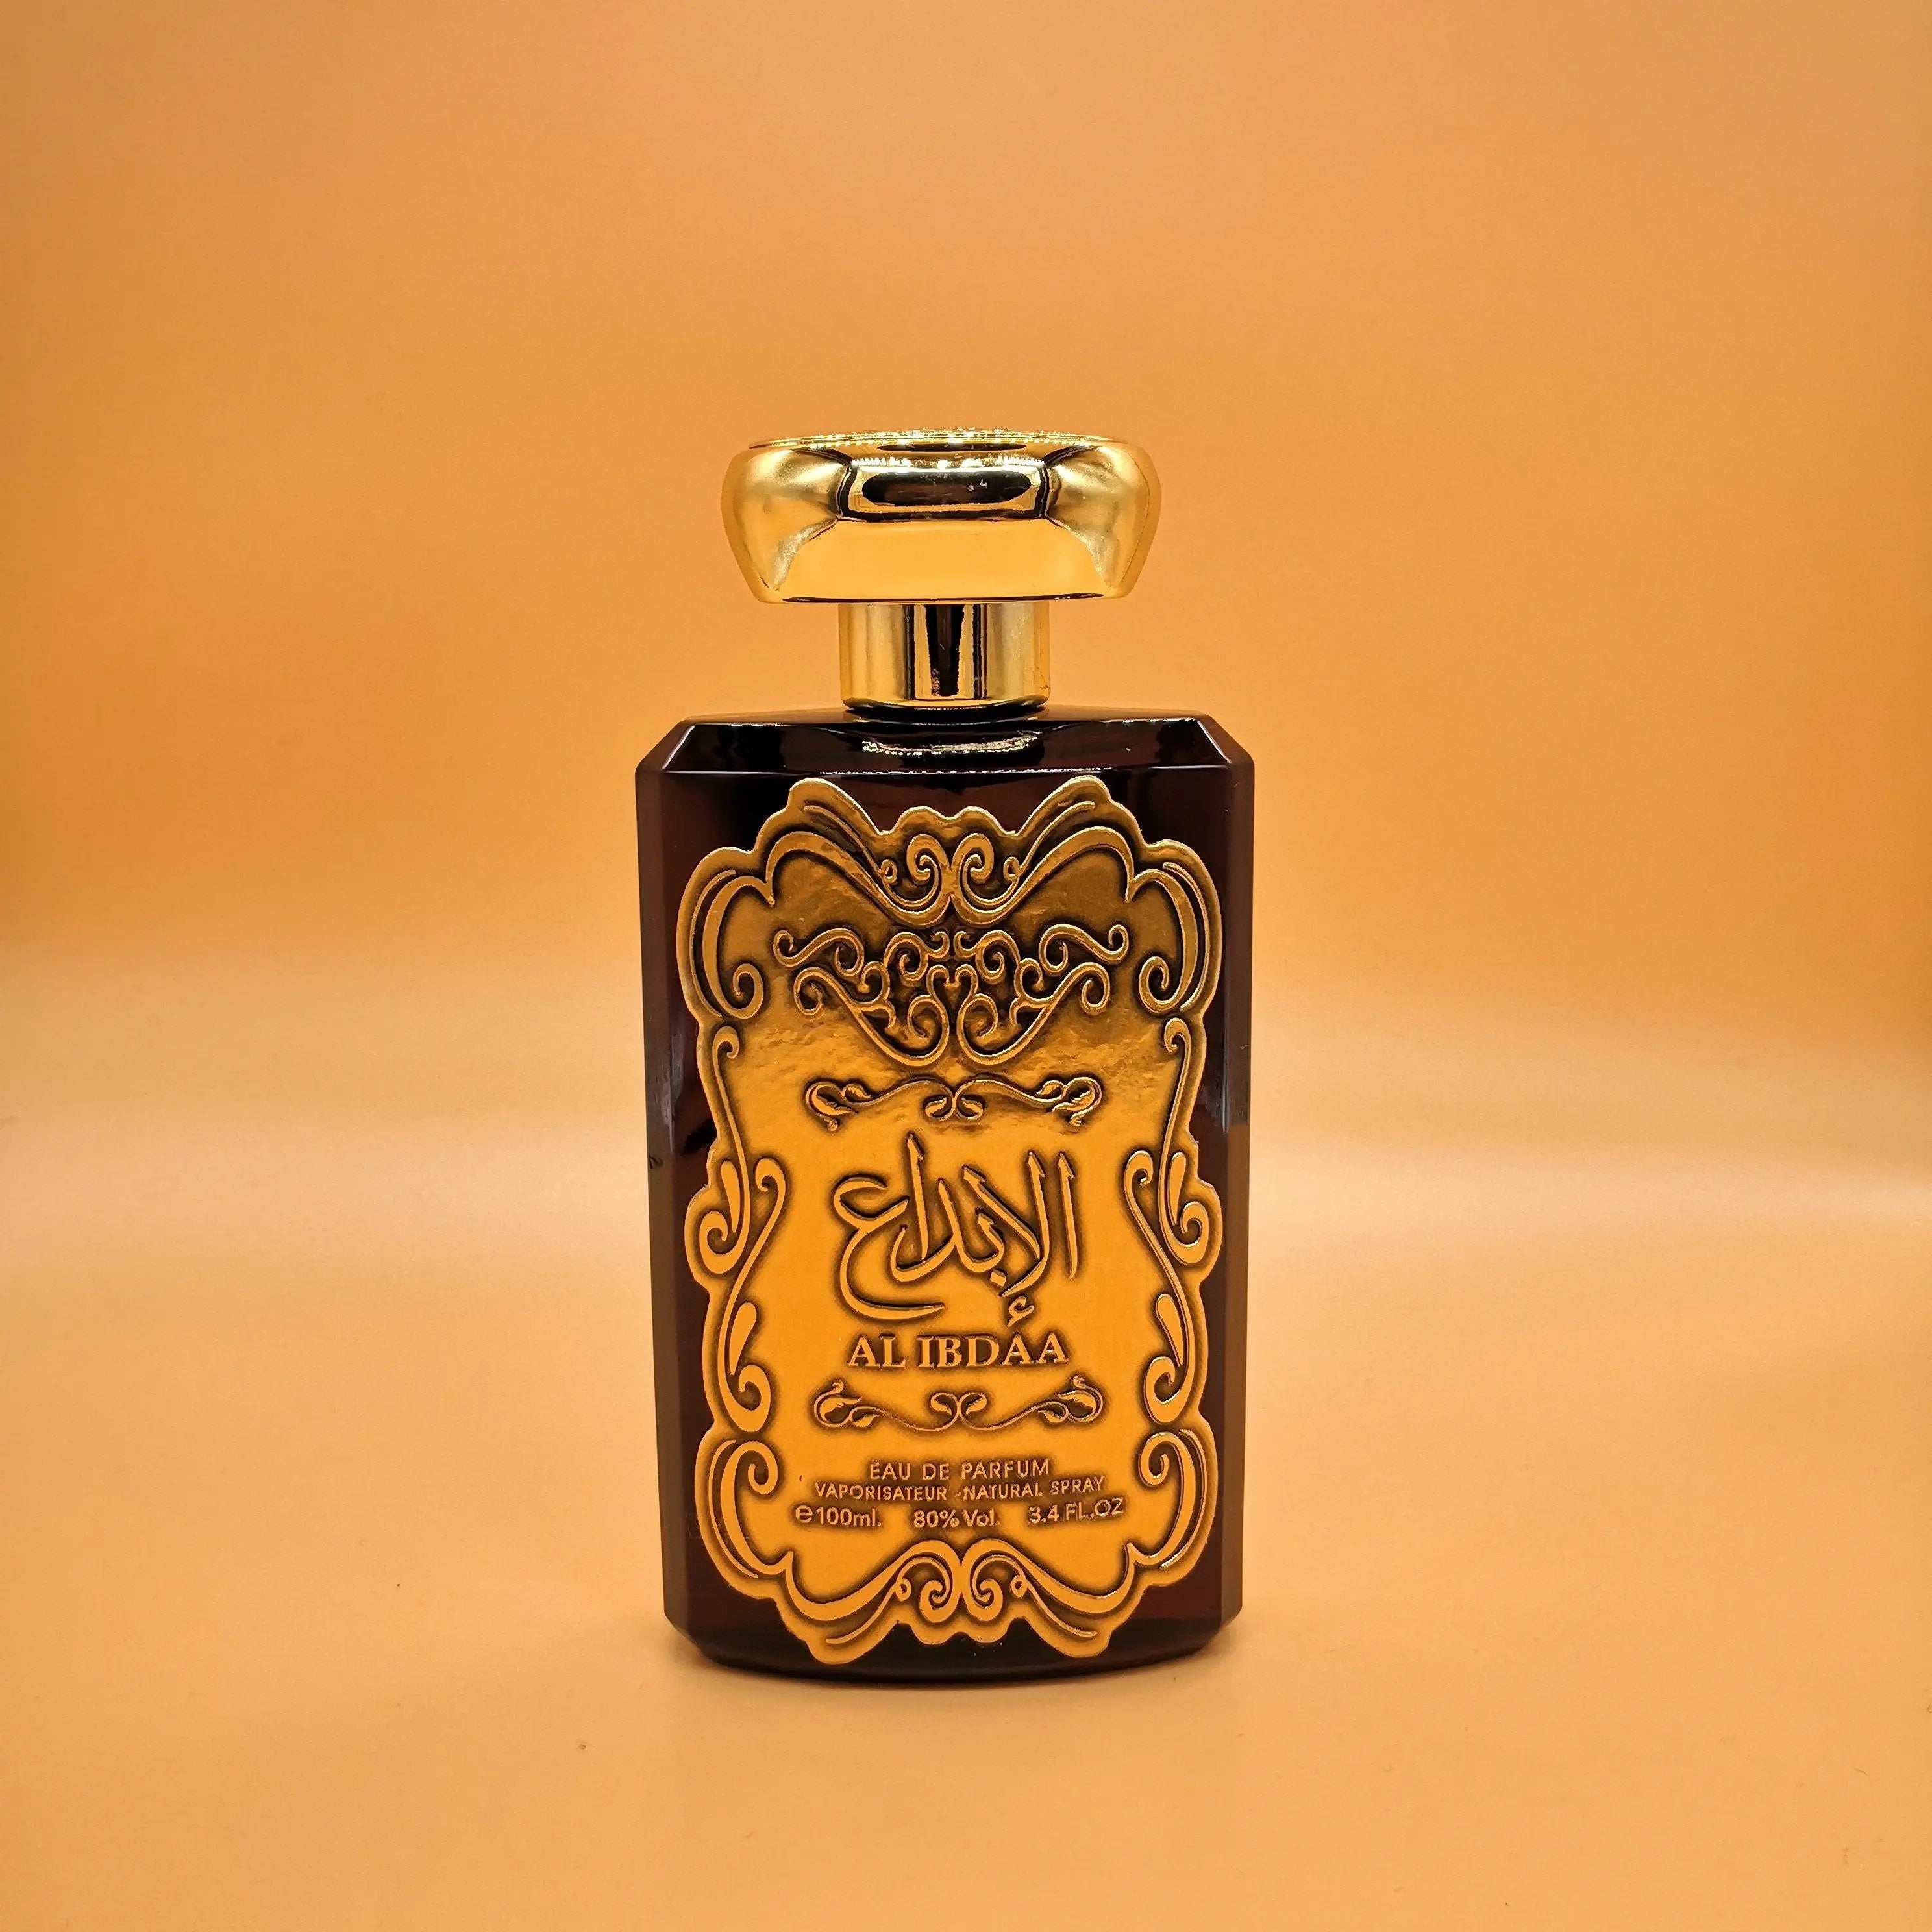 The image shows a perfume bottle with a dark, translucent body and a shiny gold label. The label features intricate, ornate designs and Arabic calligraphy that reads "AL IBDAA," which is likely the name of the fragrance. Below the calligraphy, in smaller English text, it says "EAU DE PARFUM NATURAL SPRAY 100ml 3.4FL.OZ," indicating the contents and volume. The cap of the bottle is gold and has a simple, elegant shape. 